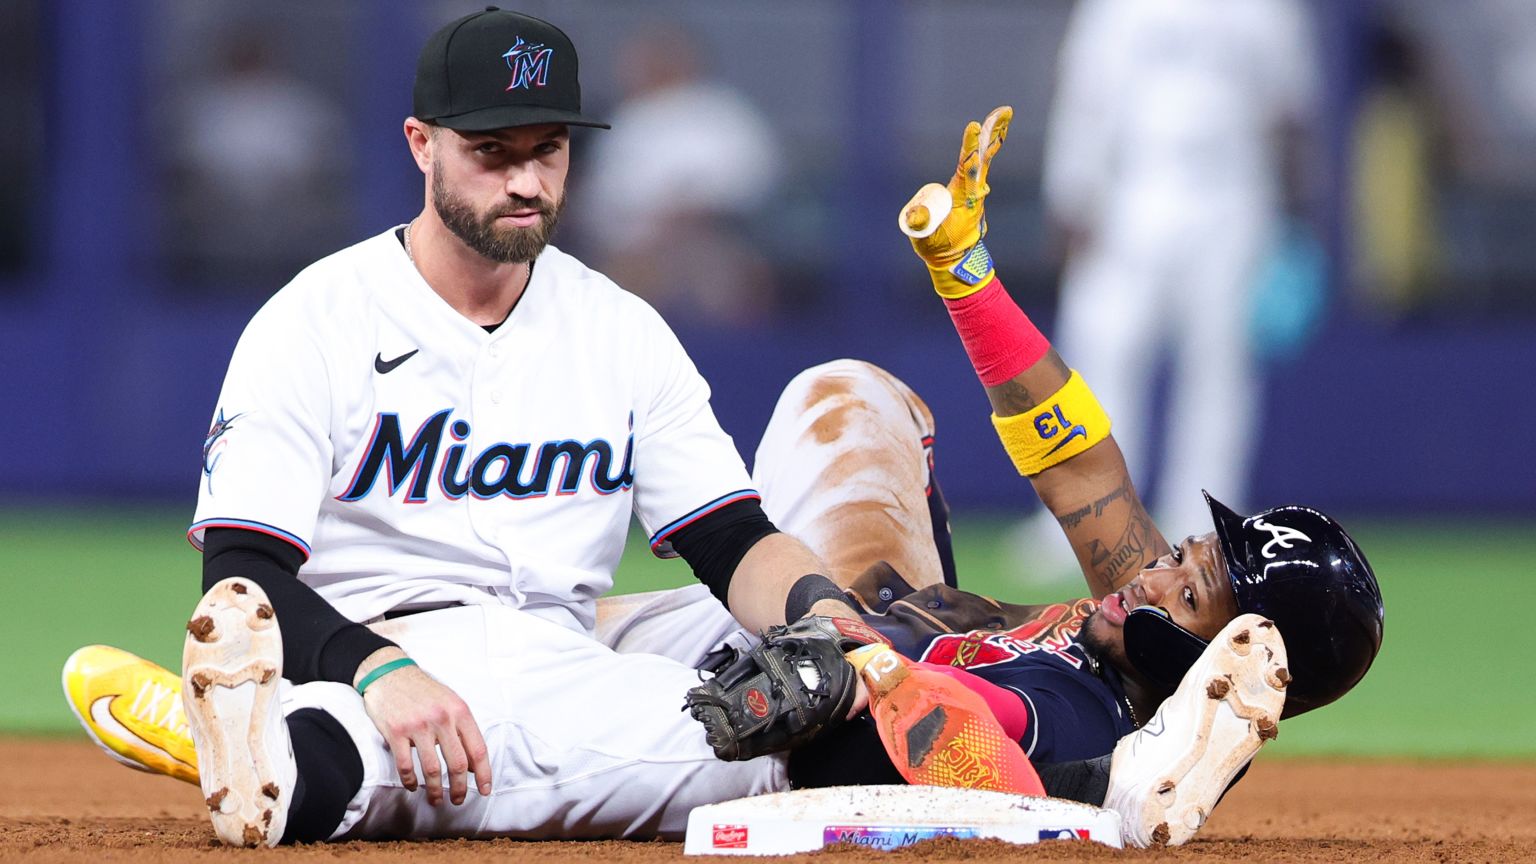 The Miami Marlins are having difficulty against the Atlanta Braves